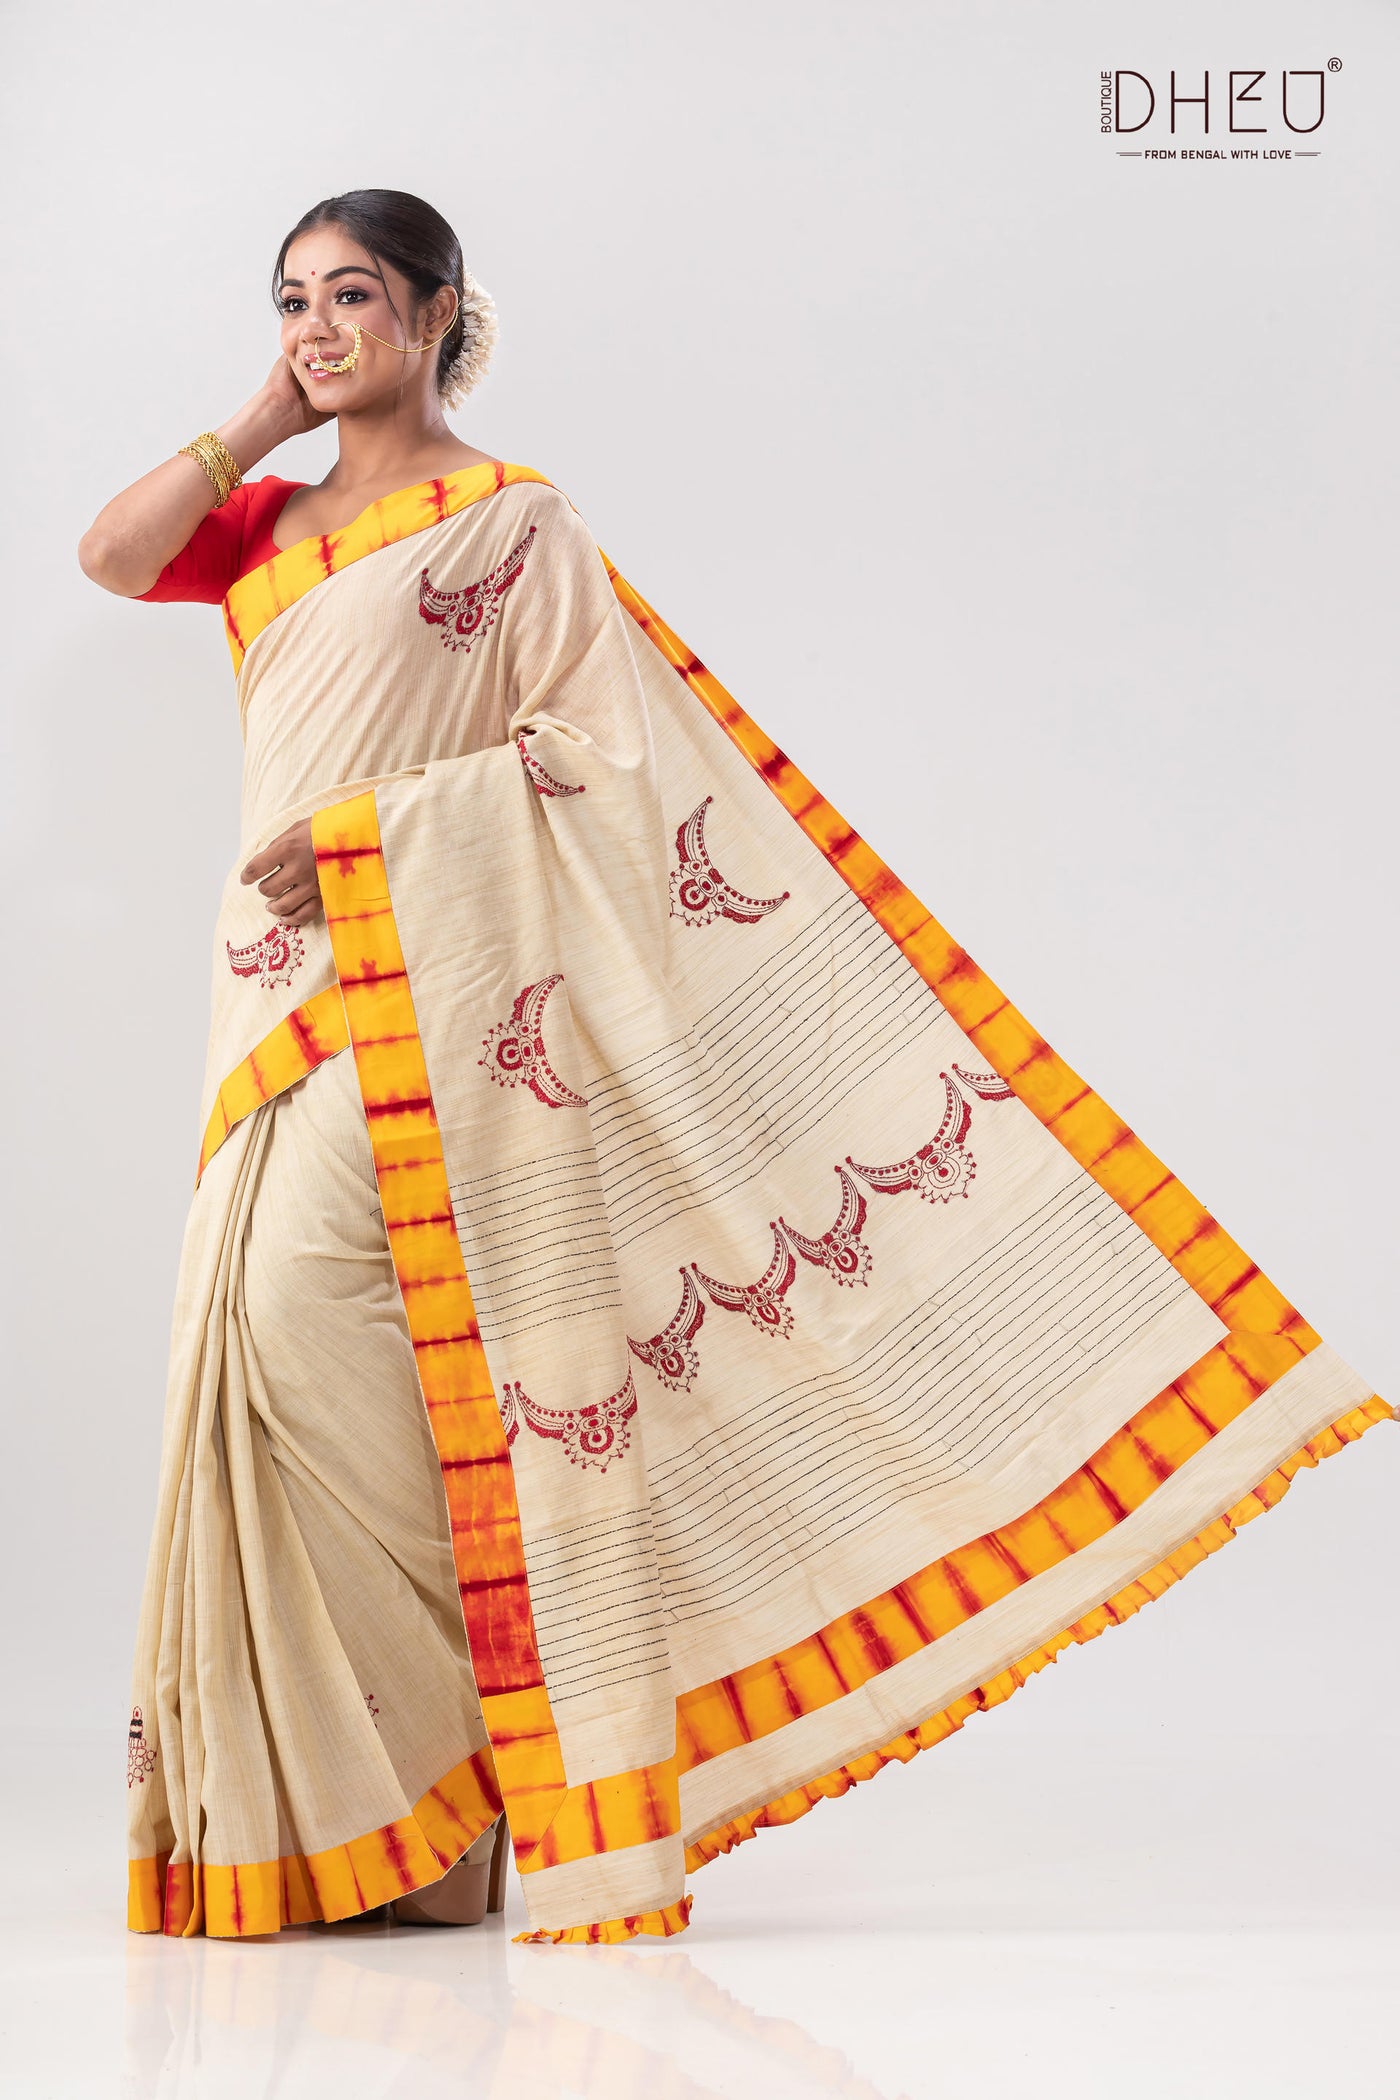 Dheu Exclusive -Hand crafted kantha saree